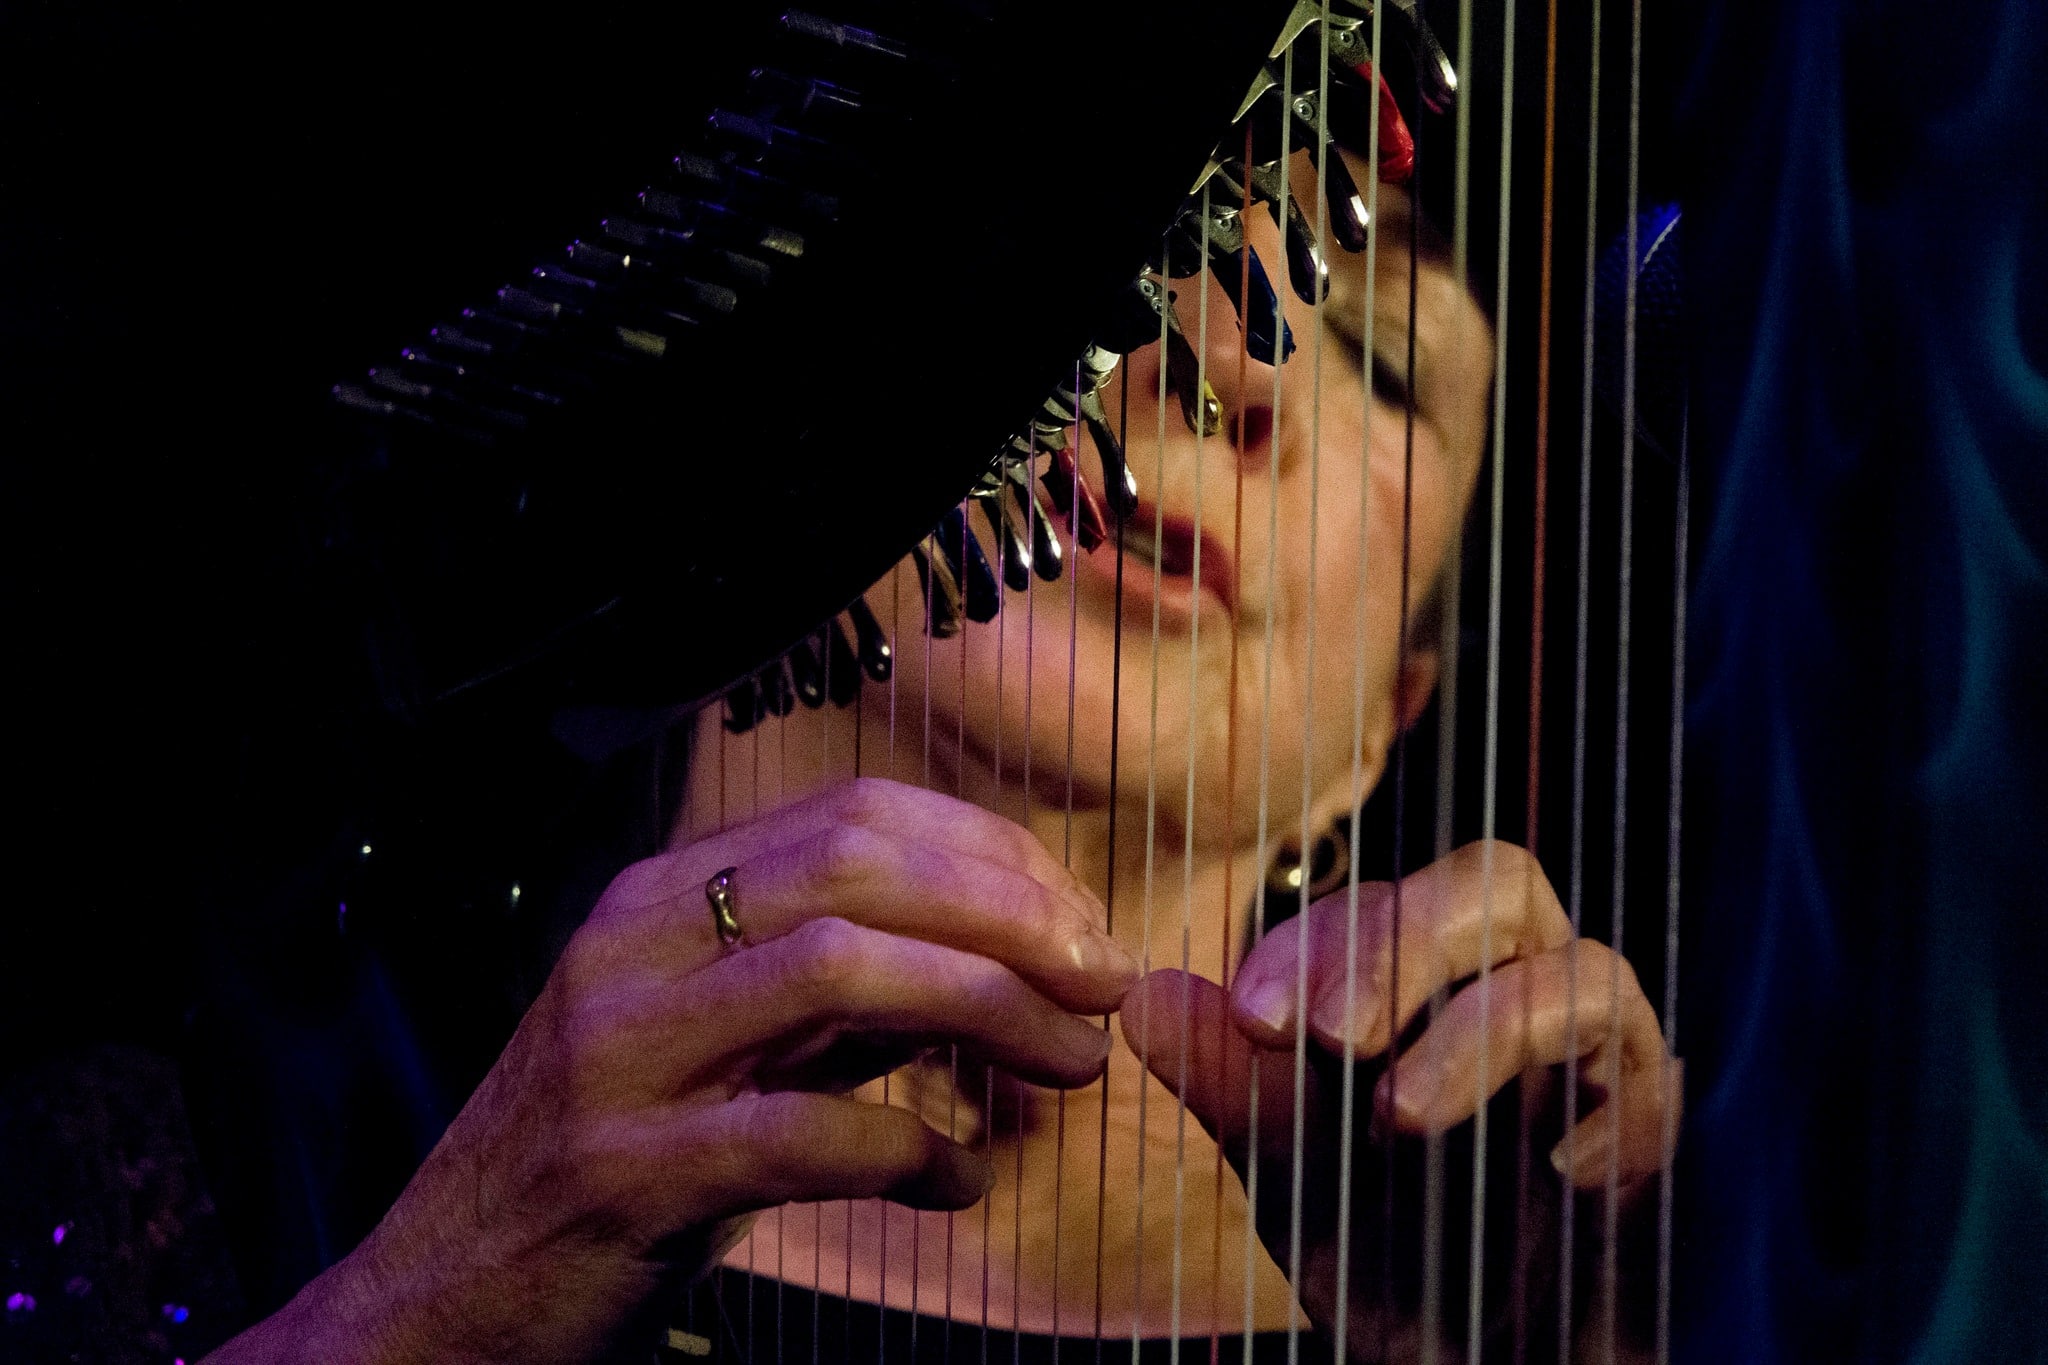 a close up shot of the musician through her harp's strings